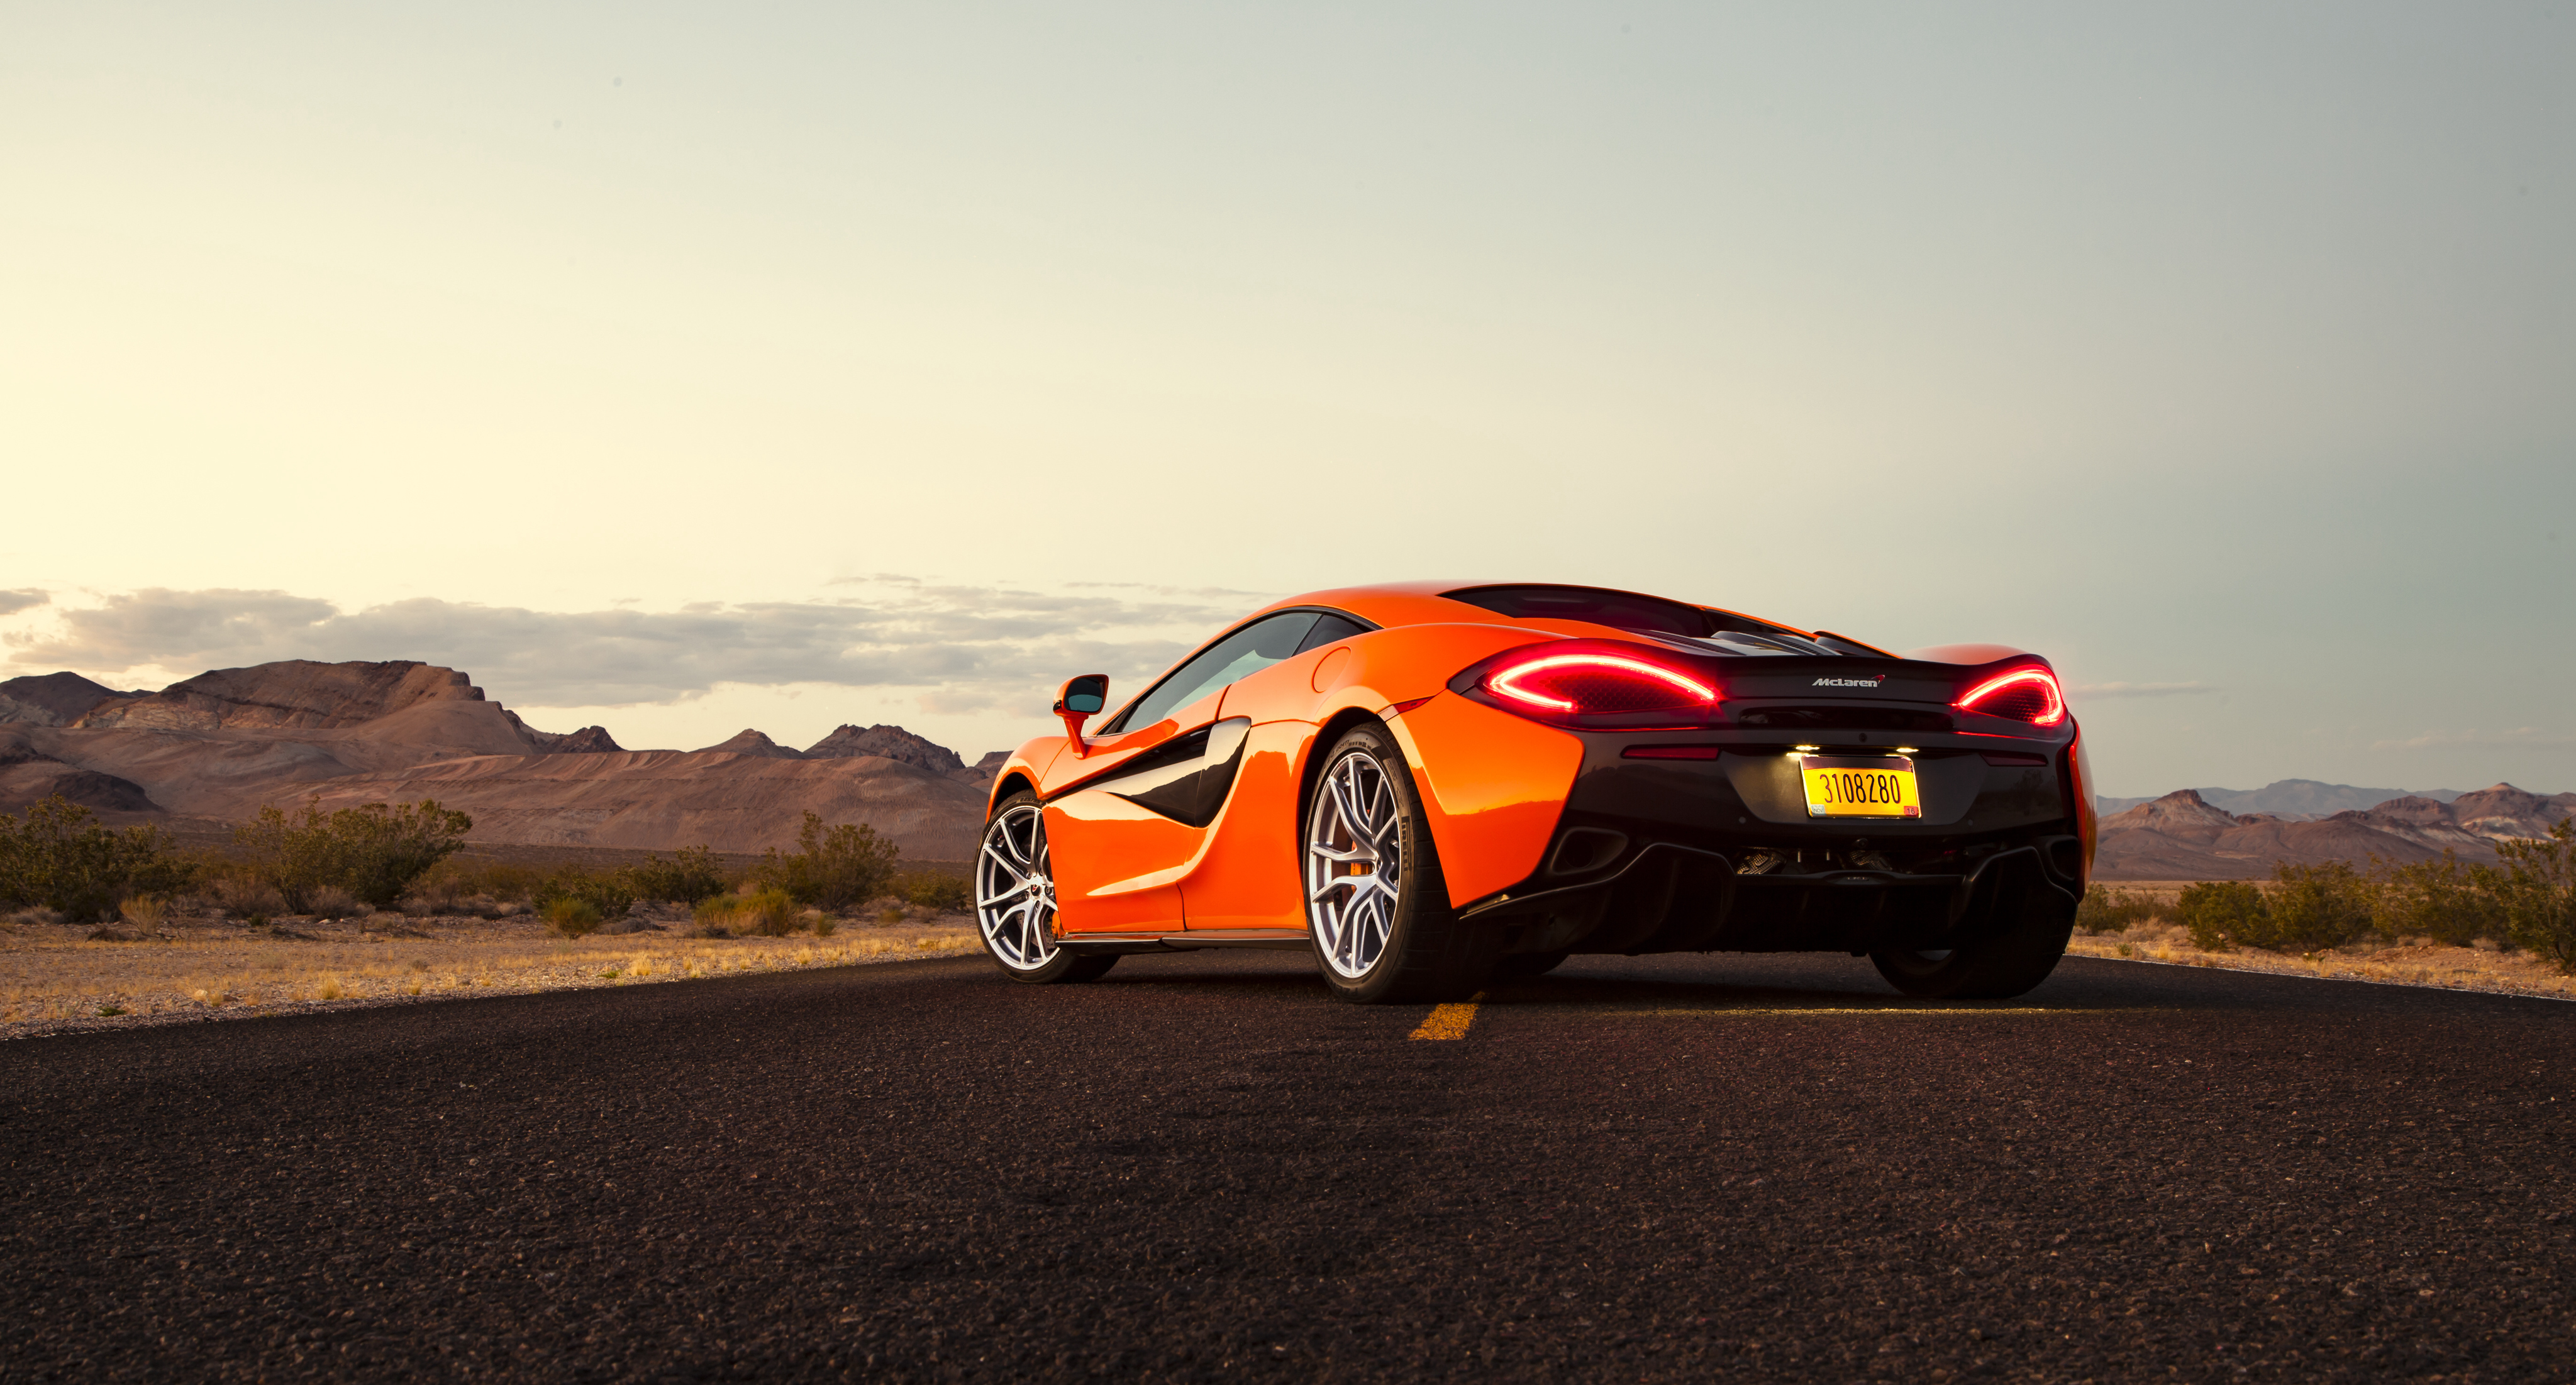 108955 download wallpaper mclaren, cars, orange, back view, rear view, 570s screensavers and pictures for free